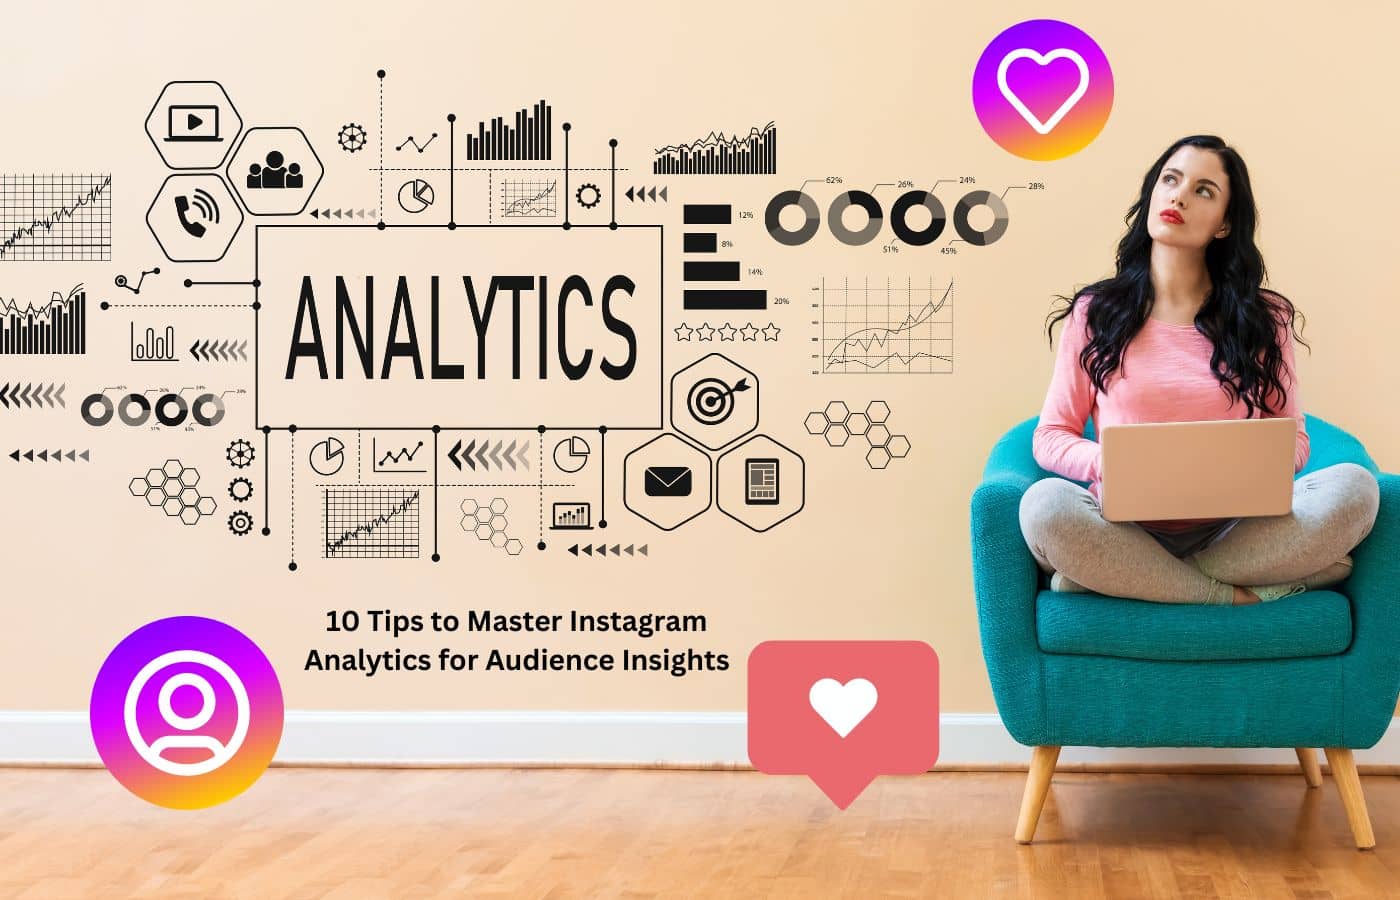 10 Tips to Master Instagram Analytics for Audience Insights